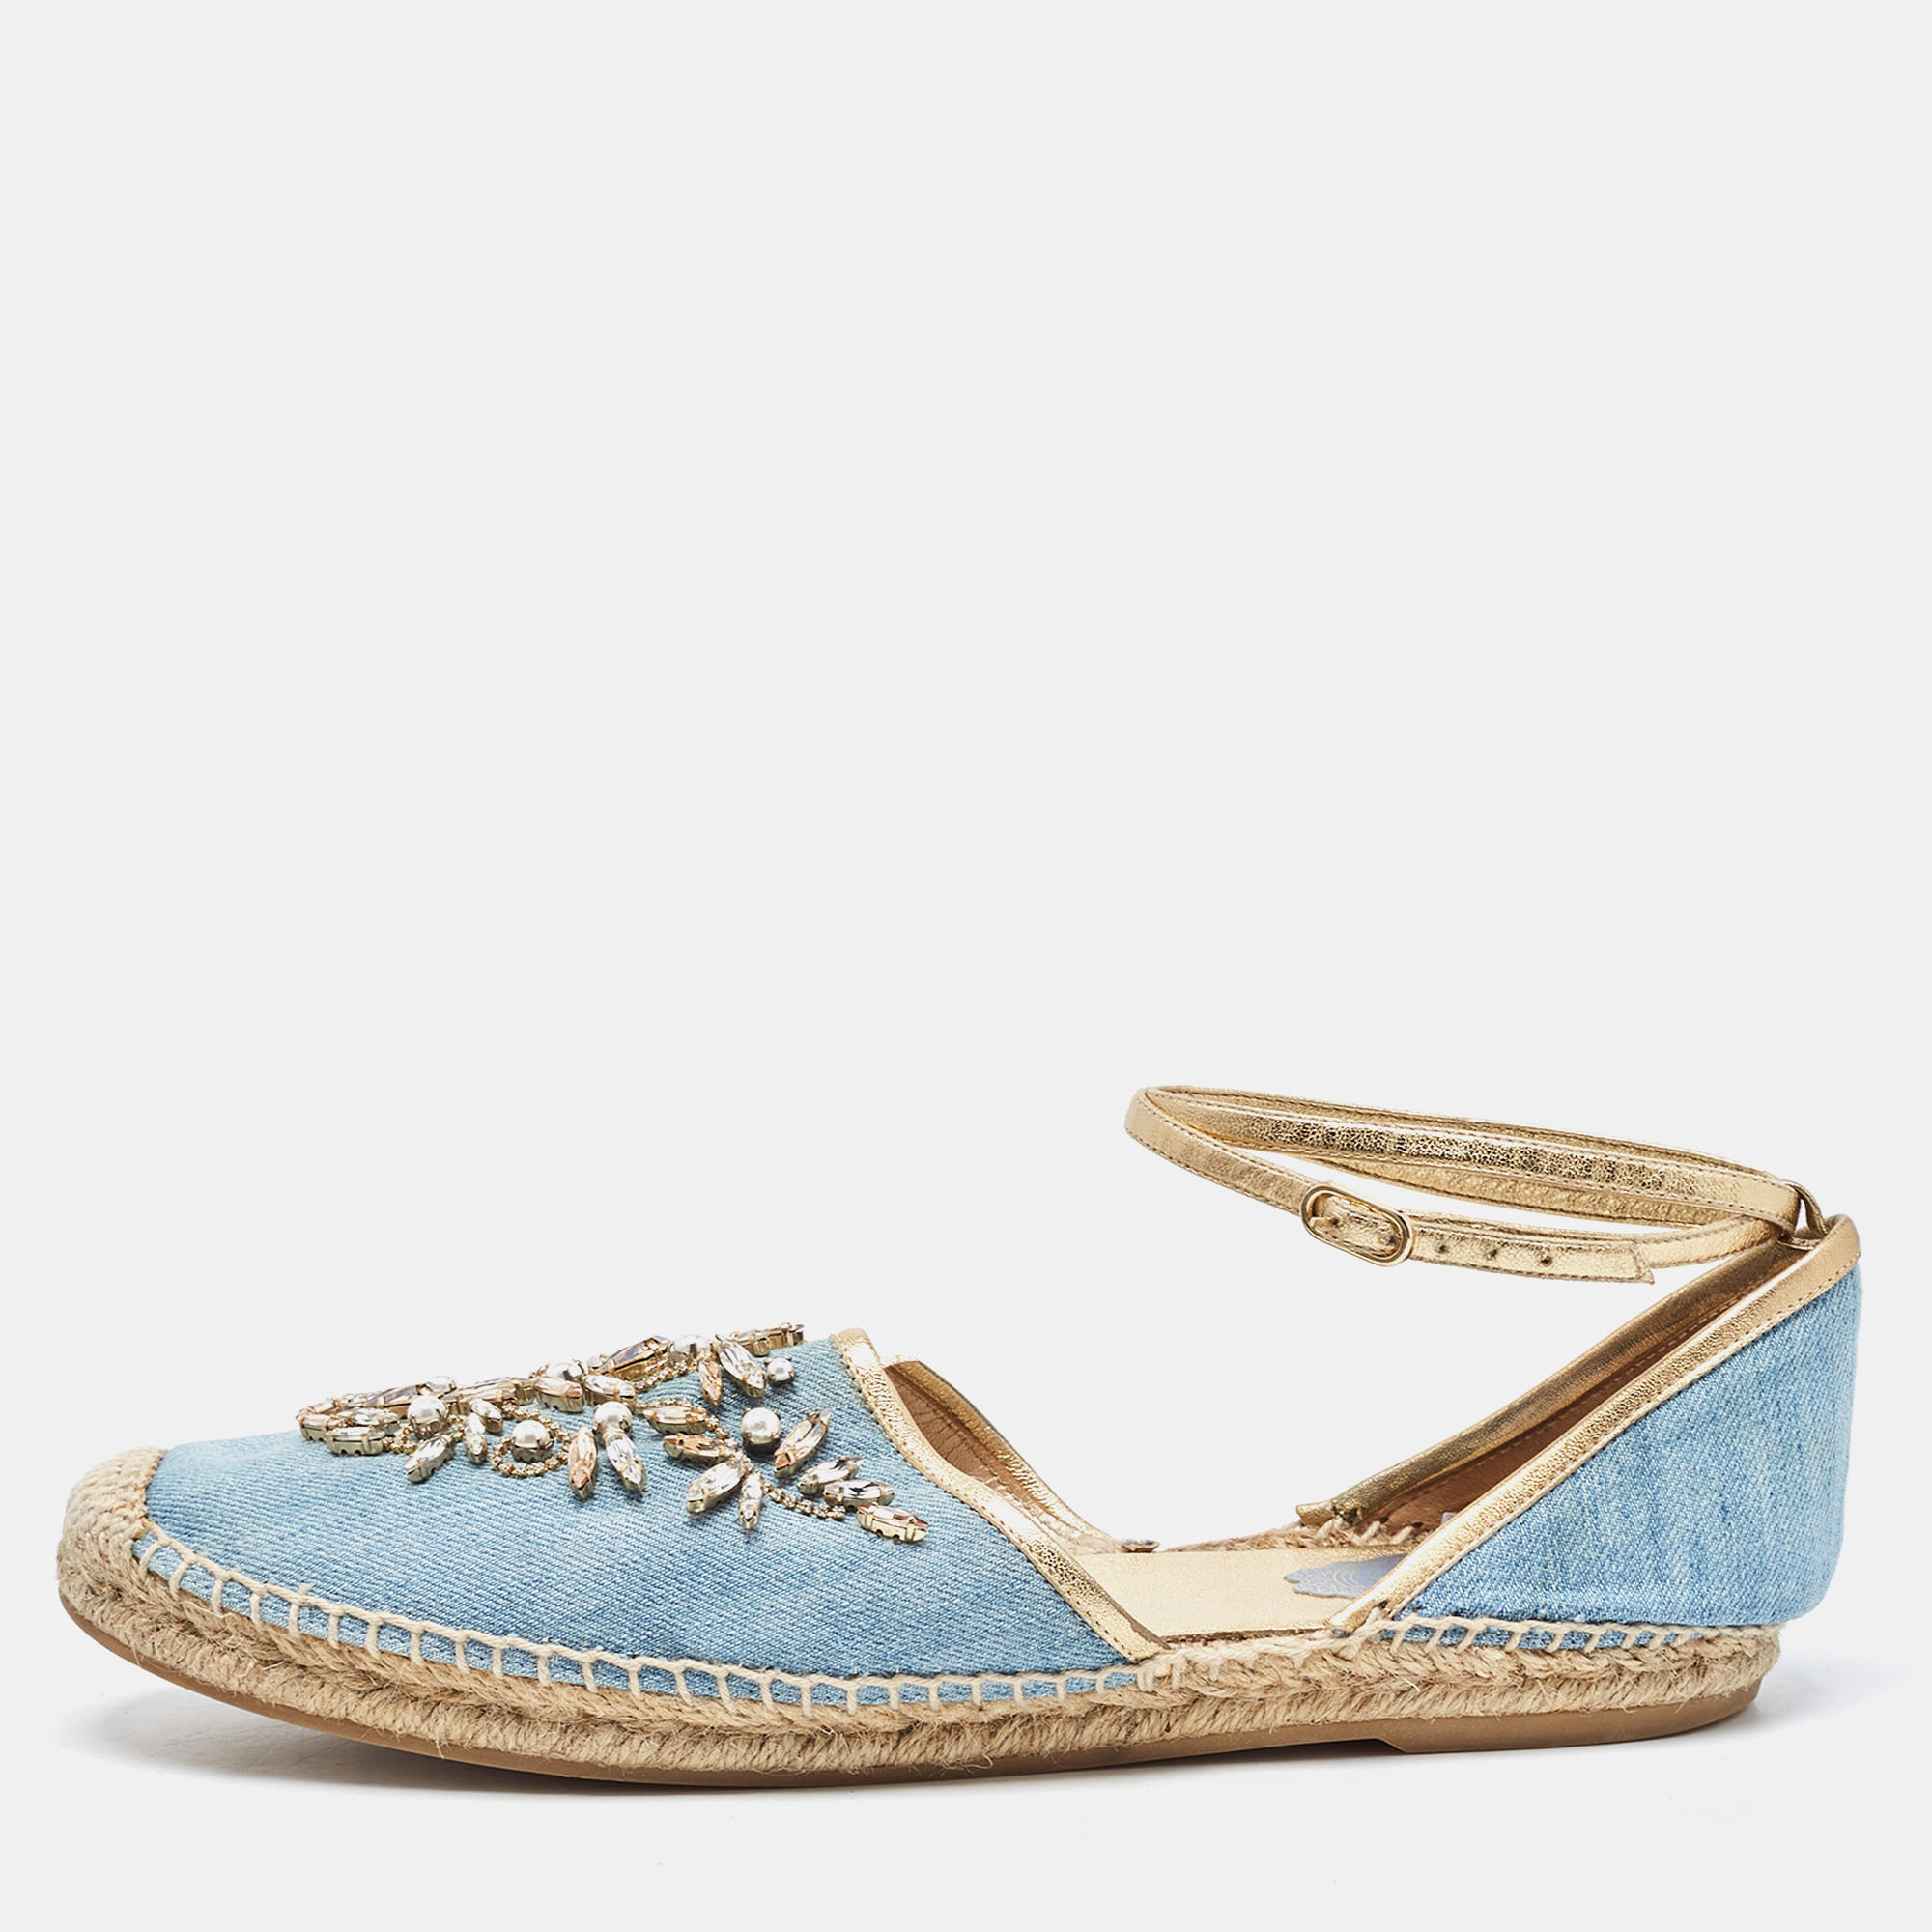 Pre-owned René Caovilla Blue Denim And Leather Trim Crystal Embellished Ankle Wrap Espadrille Flats Size 41